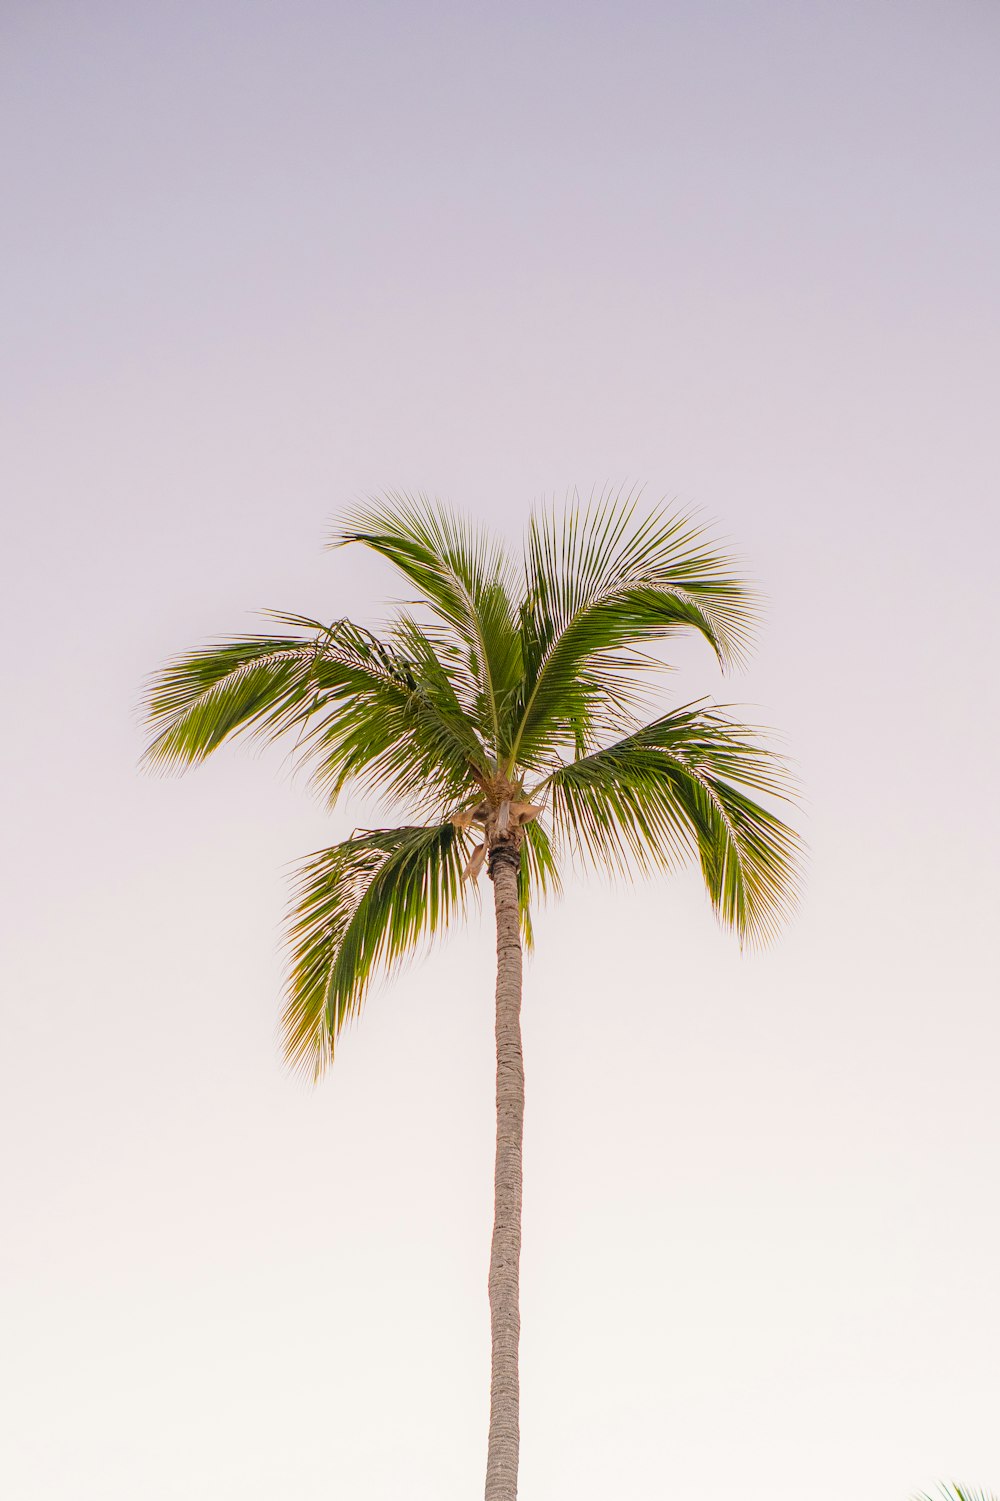 a palm tree is shown against a pale blue sky